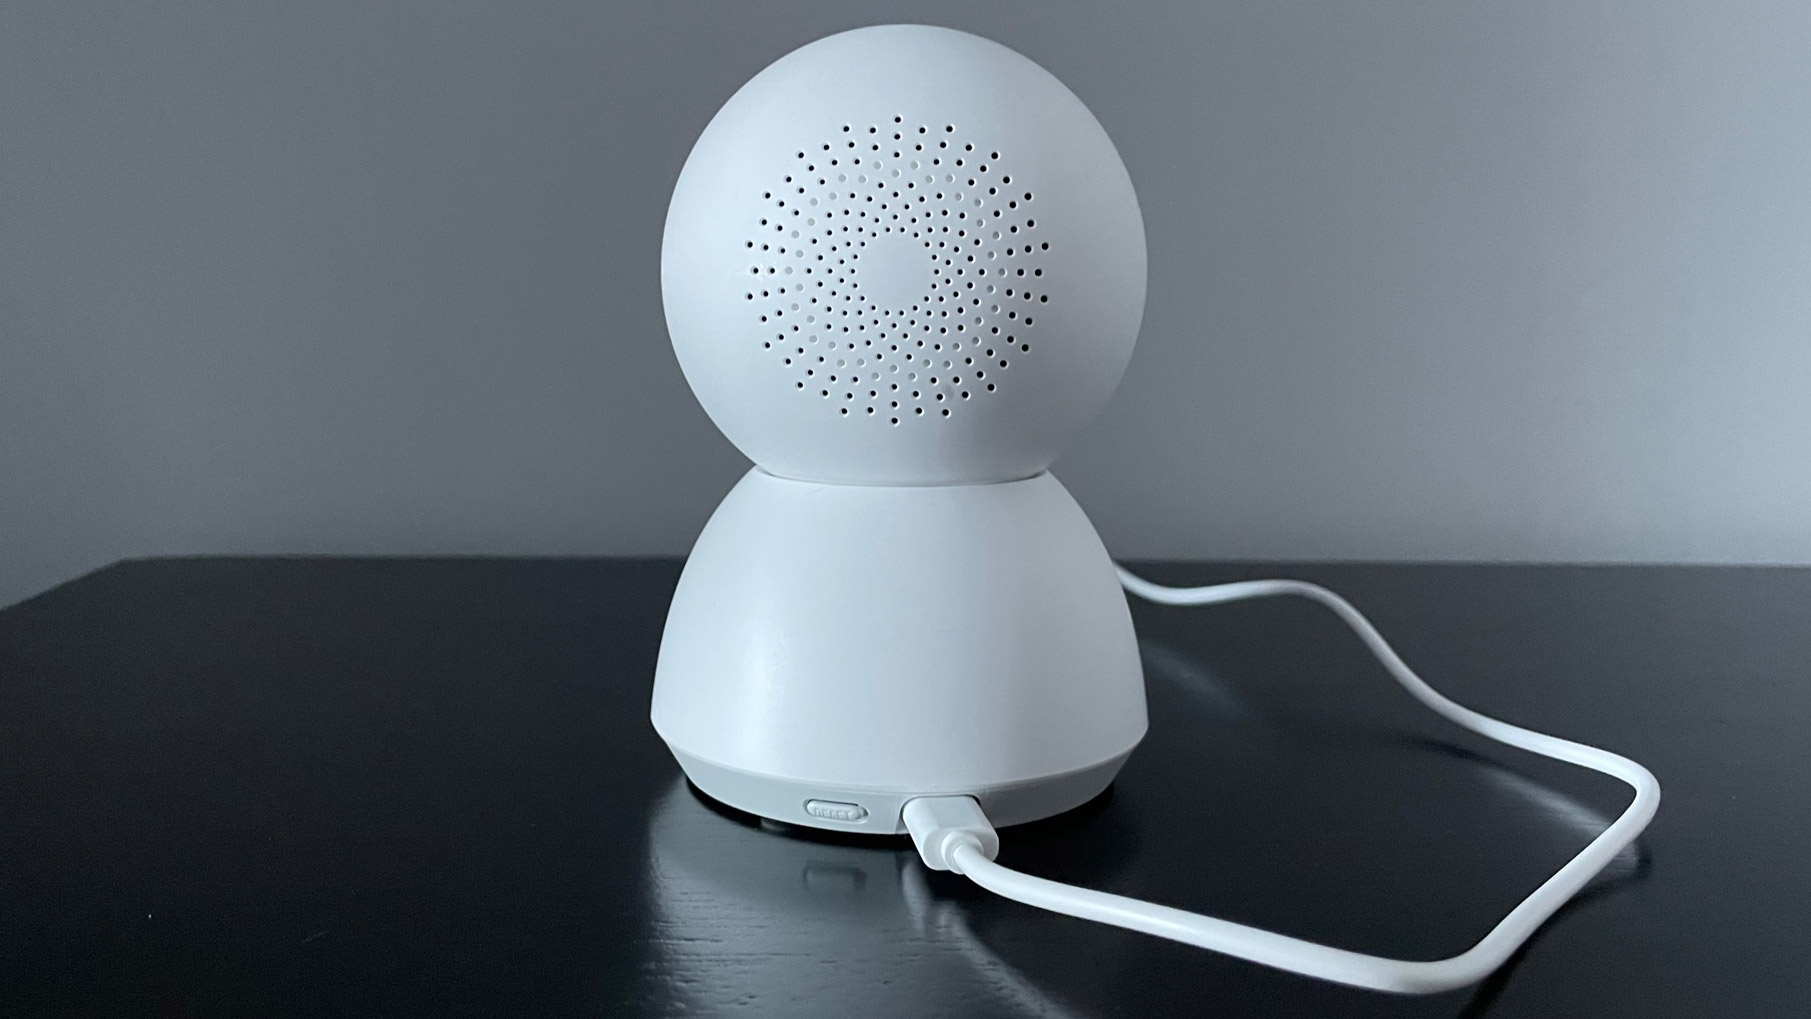 The back view of the Xiaomi Mi Home Security Camera 360